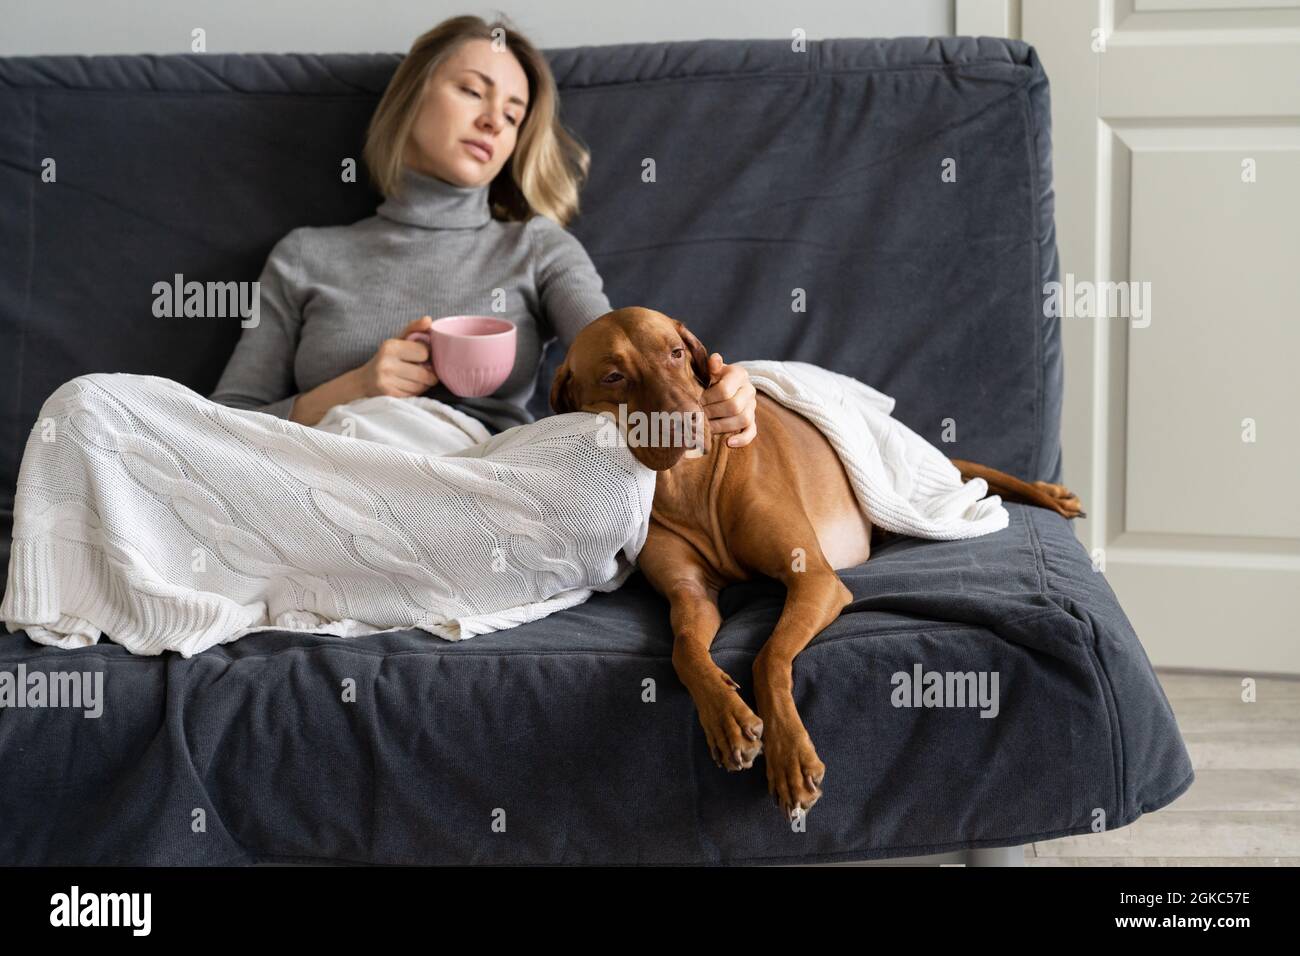 Frustrated adult woman avoid social contacts at home with dog after friend betrayal, lover breakup Stock Photo